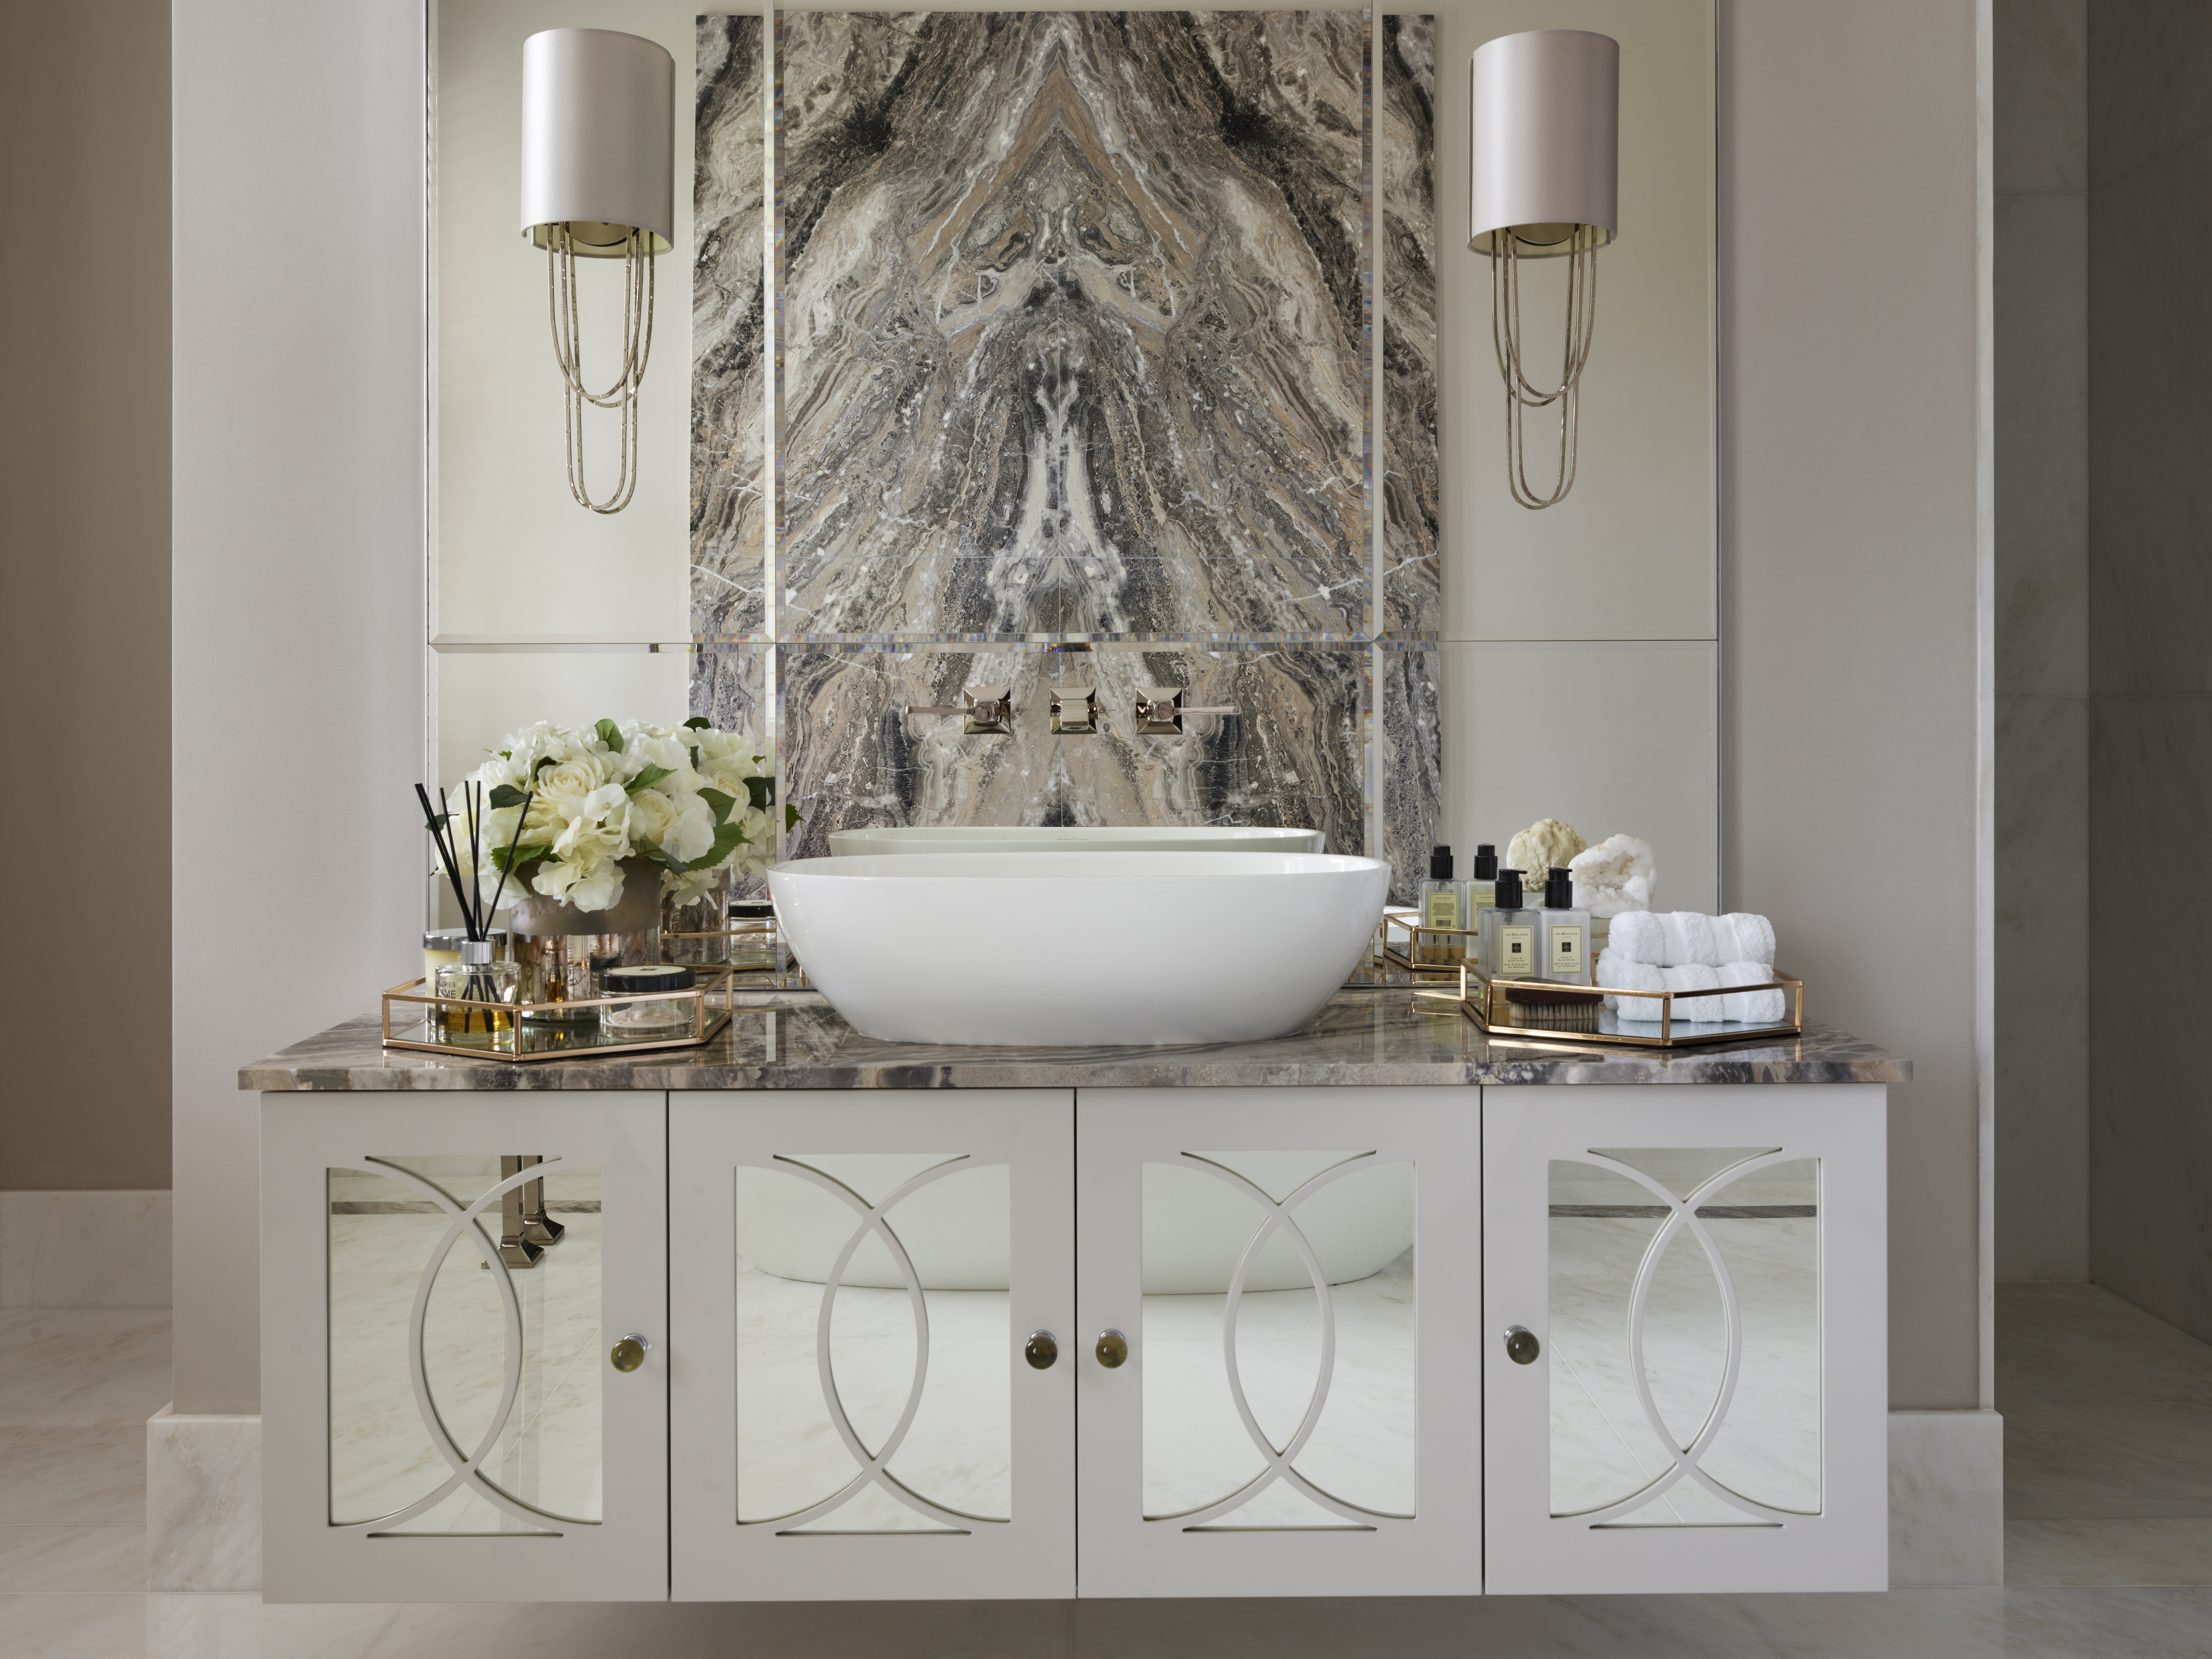 A veined slab of marble reflected in the mirror of a grand bathroom